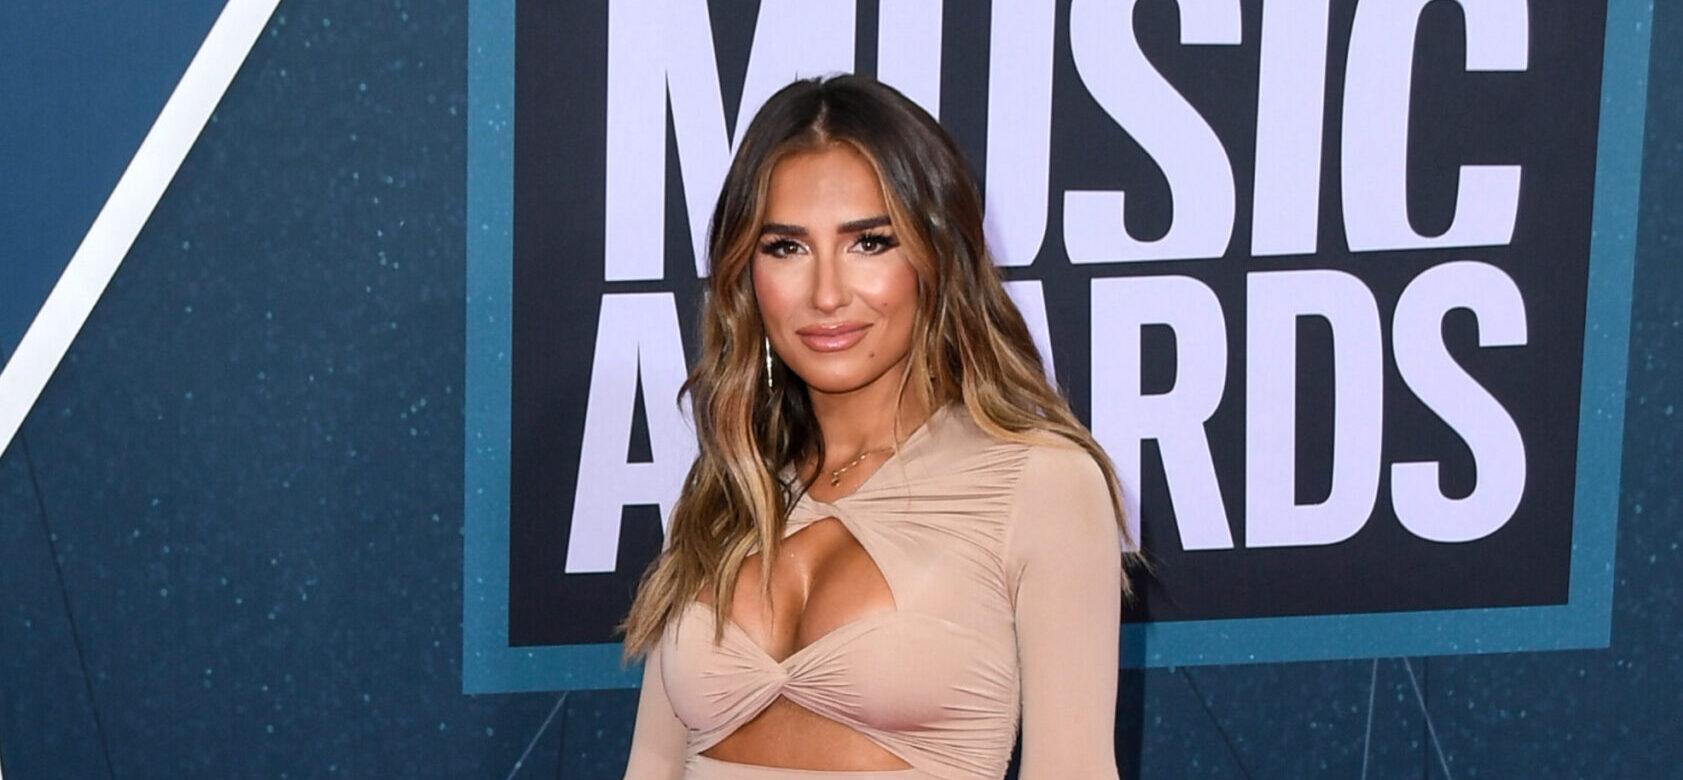 Jessie James Decker Claps Back At Haters By Flaunting Body In Black Bikini